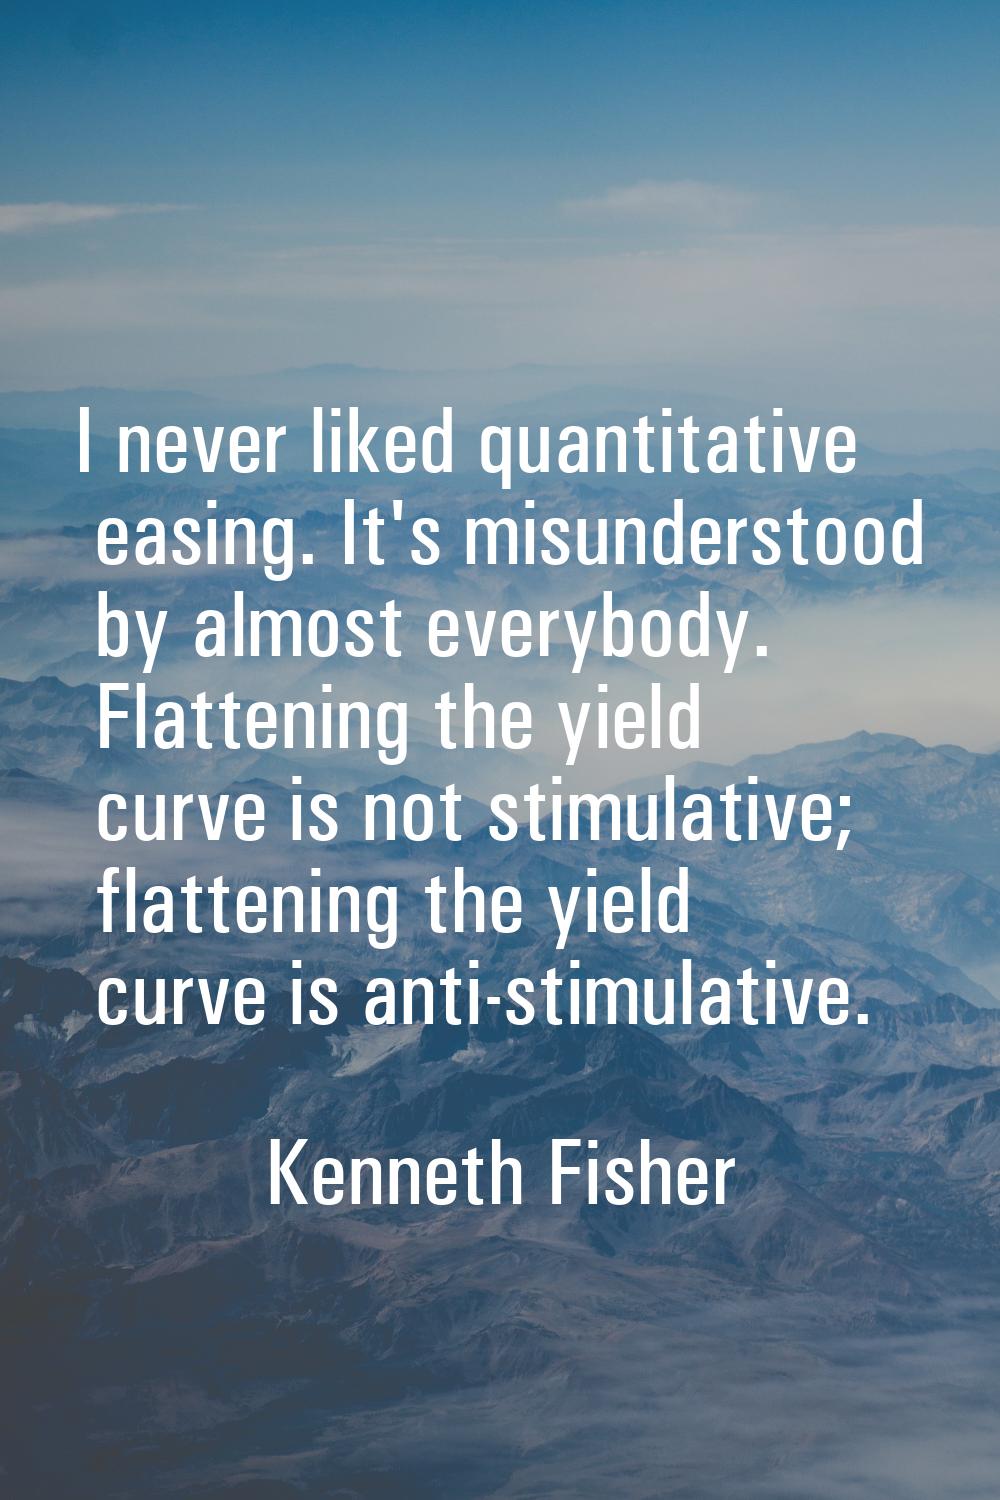 I never liked quantitative easing. It's misunderstood by almost everybody. Flattening the yield cur